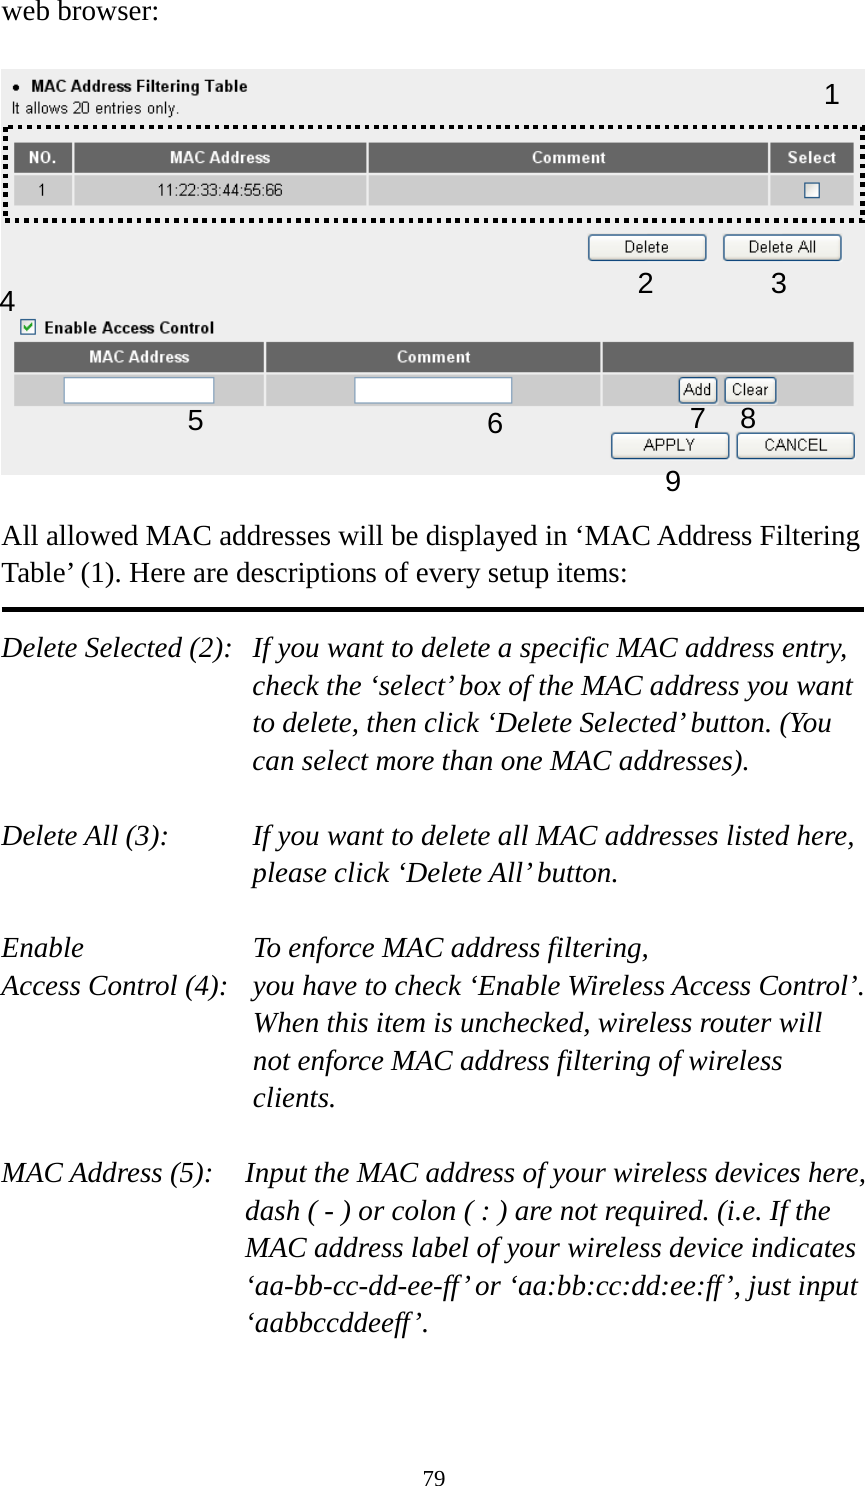 79 web browser:    All allowed MAC addresses will be displayed in ‘MAC Address Filtering Table’ (1). Here are descriptions of every setup items:  Delete Selected (2):   If you want to delete a specific MAC address entry, check the ‘select’ box of the MAC address you want to delete, then click ‘Delete Selected’ button. (You can select more than one MAC addresses).  Delete All (3):    If you want to delete all MAC addresses listed here, please click ‘Delete All’ button.  Enable      To enforce MAC address filtering, Access Control (4):   you have to check ‘Enable Wireless Access Control’. When this item is unchecked, wireless router will not enforce MAC address filtering of wireless clients.  MAC Address (5):    Input the MAC address of your wireless devices here, dash ( - ) or colon ( : ) are not required. (i.e. If the MAC address label of your wireless device indicates ‘aa-bb-cc-dd-ee-ff’ or ‘aa:bb:cc:dd:ee:ff’, just input ‘aabbccddeeff’.   123 4 67 8 95 